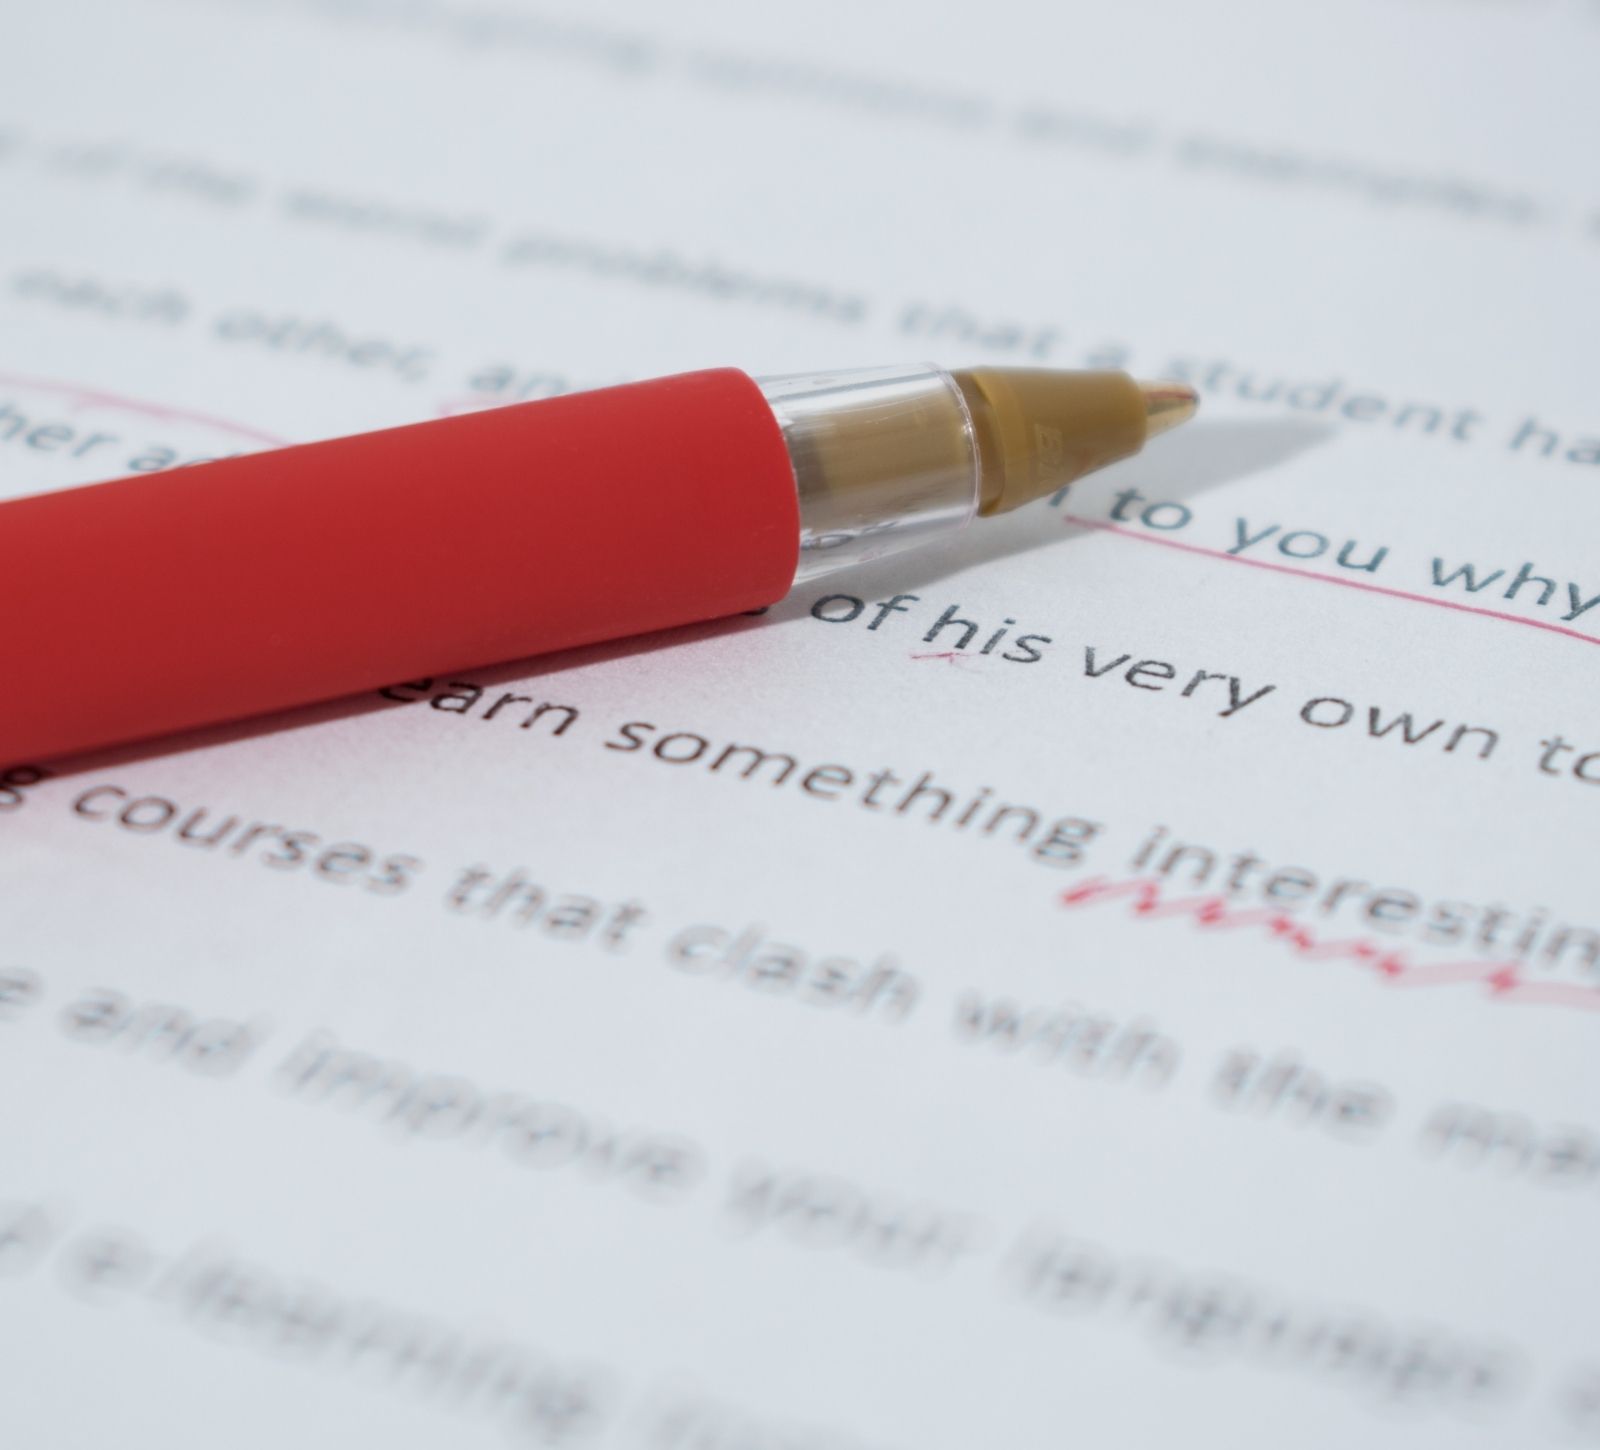 Kitchen Table CEOs Blog How To Use A Comma - 5 Ways- Red pen making edits on document